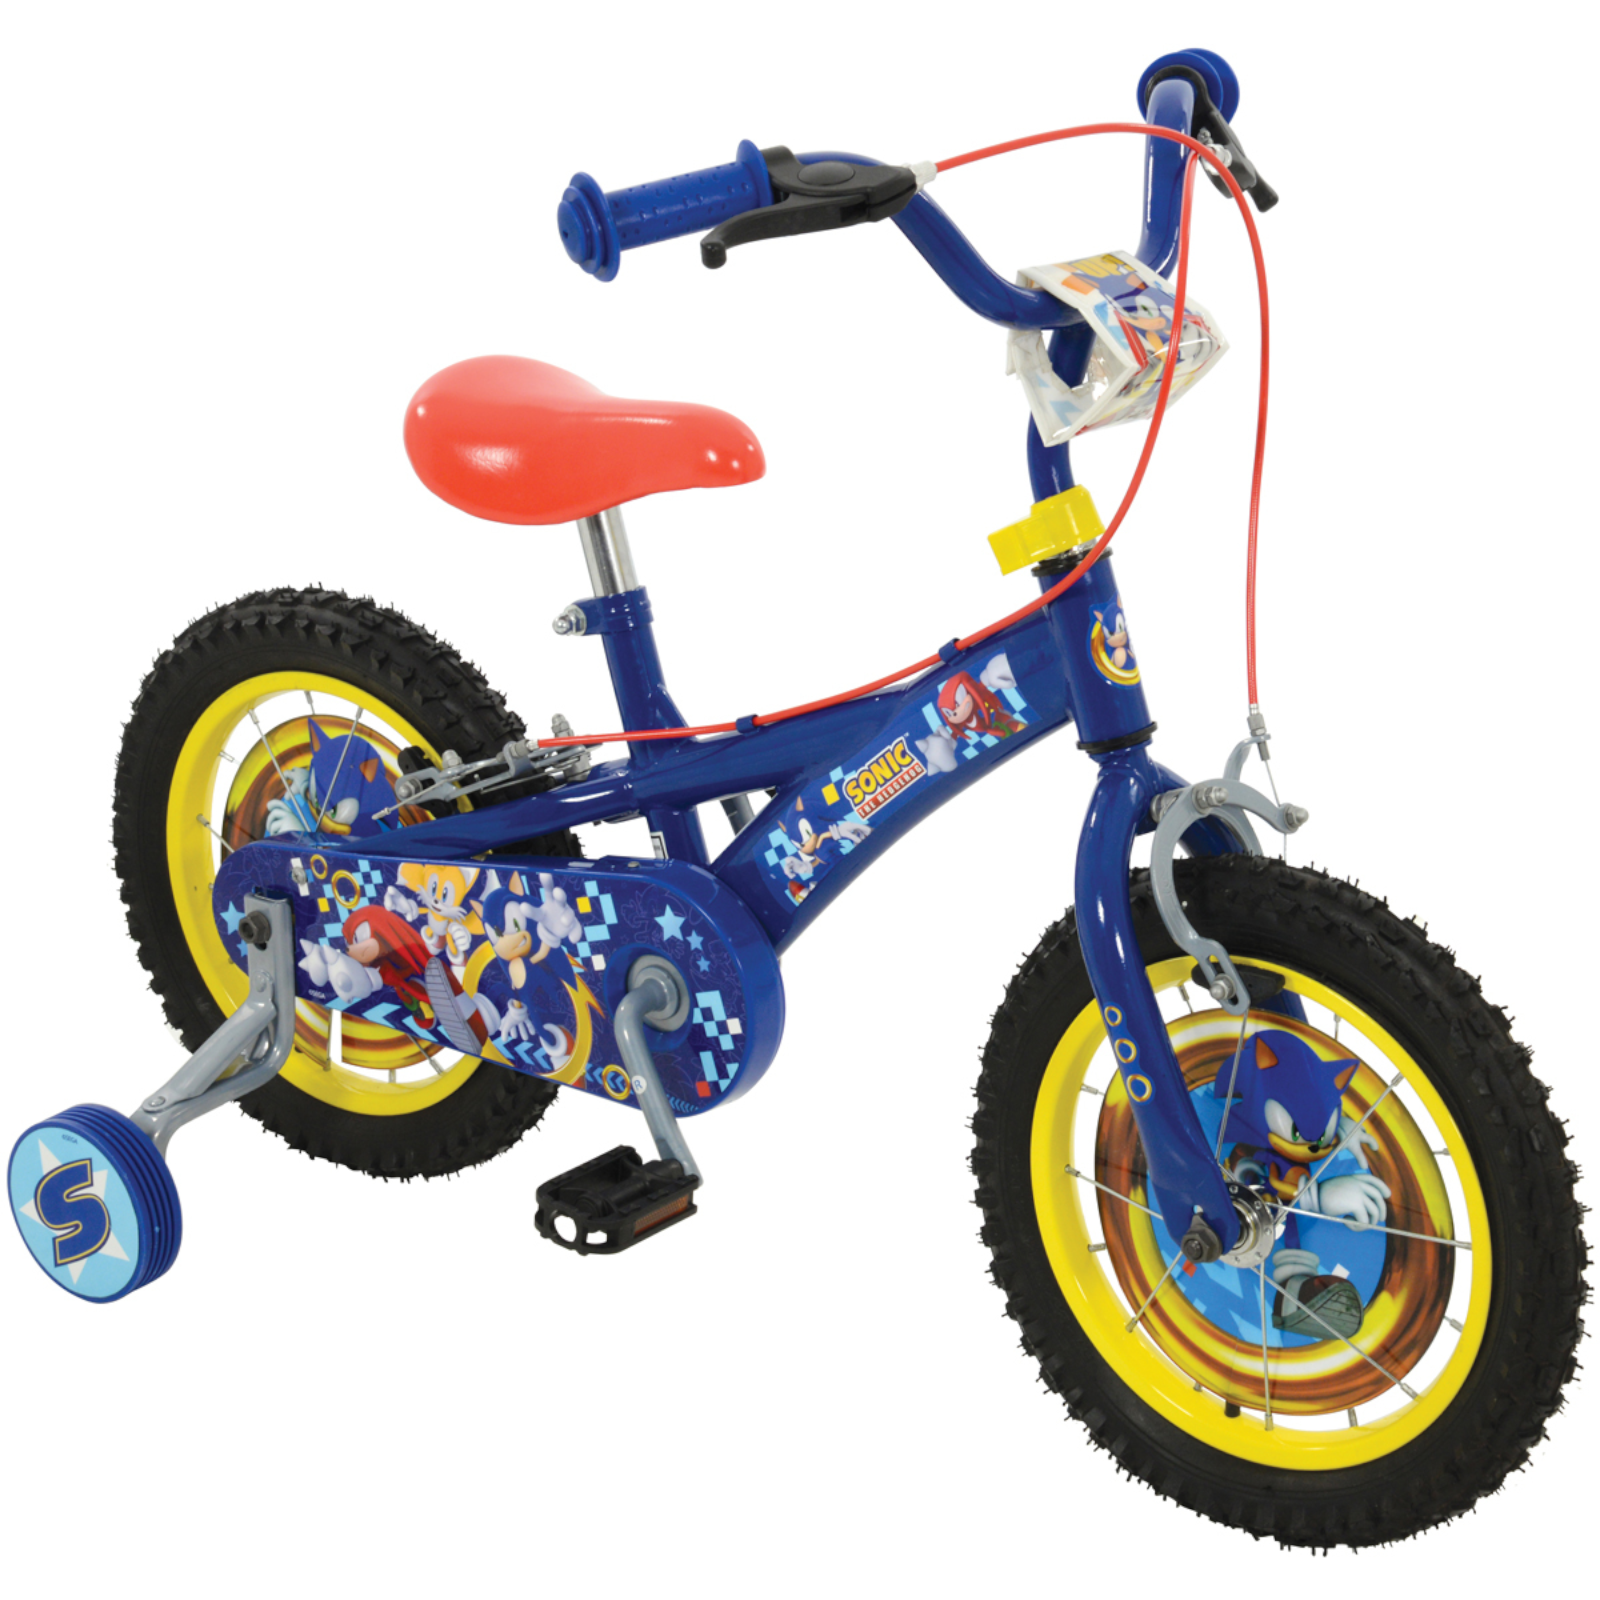 14 Inch Bike Sonic the Hedgehog Children Bicycle with Stabiliser Steel Frame